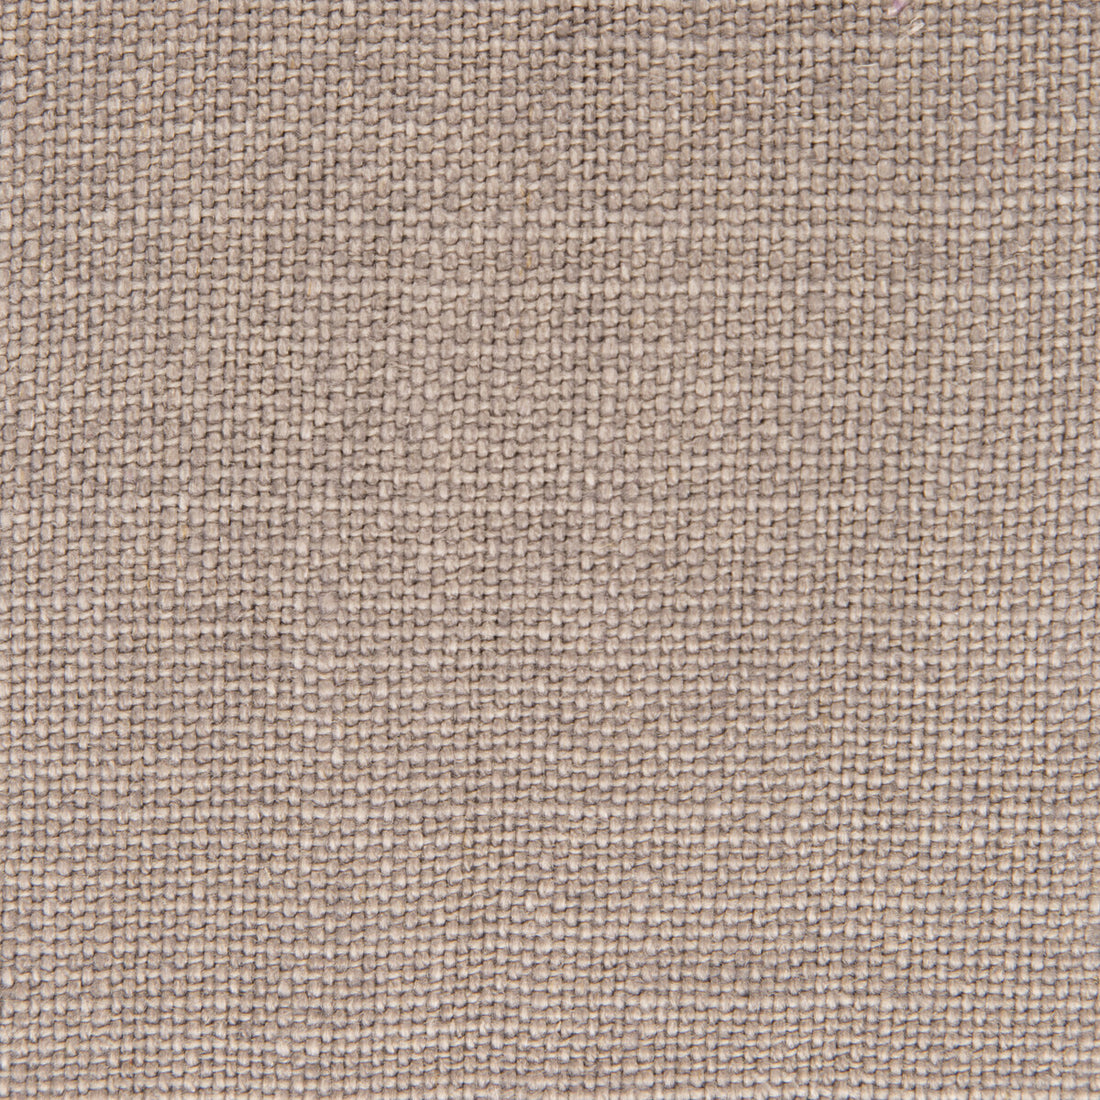 Nicaragua fabric in malva color - pattern GDT5239.005.0 - by Gaston y Daniela in the Basics collection